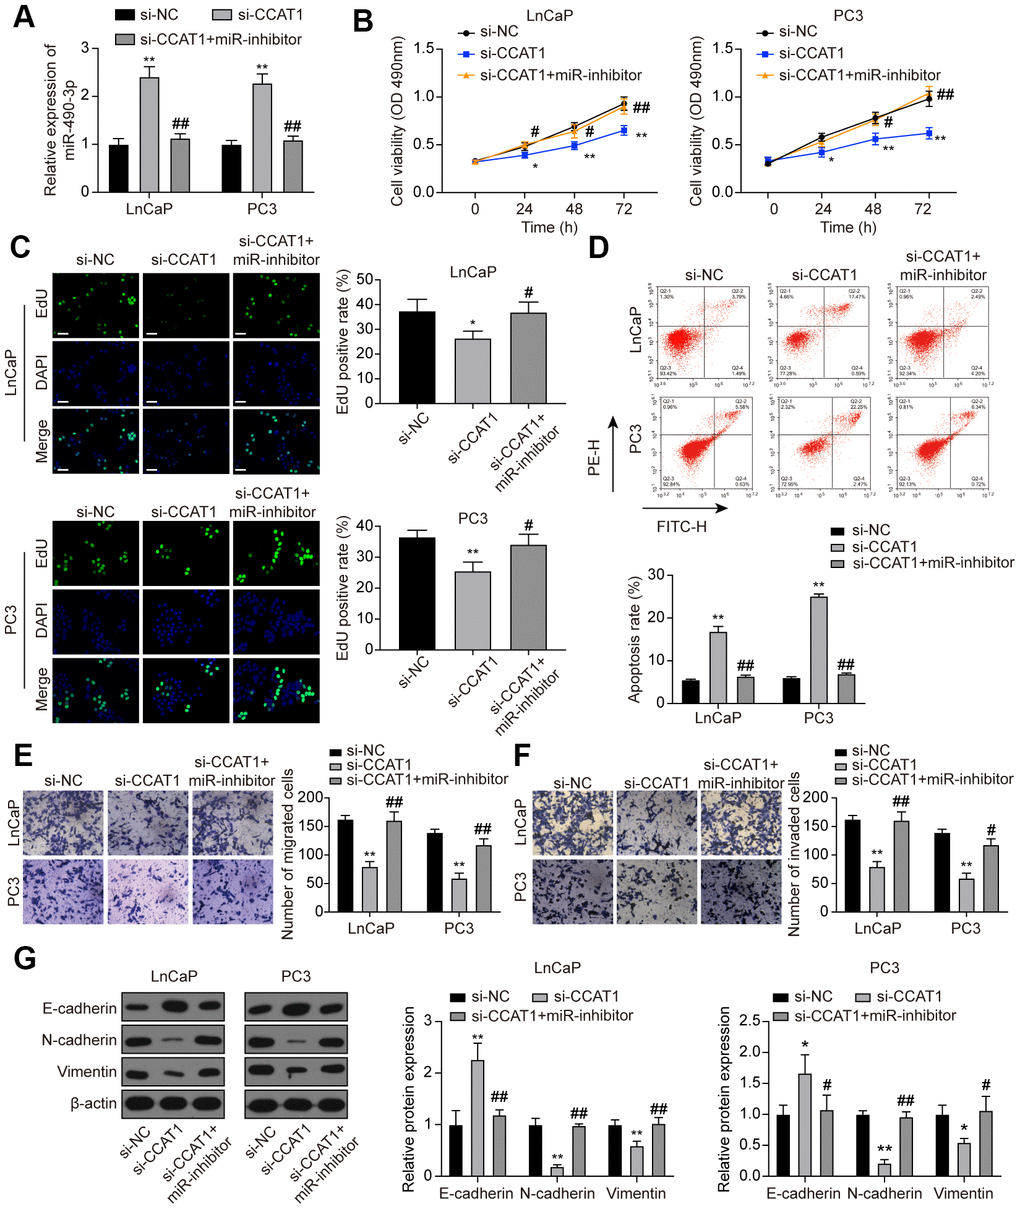 miR-490-3p inhibition restored the influences of CCAT1 knockdown in PCa cells. (A) miR-490-3p expression in LnCaP and PC3 cells transfected with si-CCAT1 or si-CCAT1+miR-inhibitor. (B) Cell viability of LnCaP and PC3 cells with different treatments. Cell viability was suppressed by down-regulation of CCAT1, and reversed by additional treatment with miR-inhibitor. (C) EdU staining results in each group of LnCaP and PC3 cells. Cell proliferation inhibition induced by si-CCAT1 was alleviated by additional treatment with miR-inhibitor. Scale bar: 50 μm. (D) Cell apoptosis of LnCaP and PC3 cells by flow cytometry detection. Cell apoptosis was increased by si-CCAT1 transfection and reactivated after miR-490-3p inhibition. (E, F) Cell migration and invasion of LnCaP and PC3 cells by Transwell assays. Cell migration and invasion in PCa cells were blocked in si-CCAT1 group and retrieved in si-CCAT1+miR-inhibitor group. (G) Down-regulation of CCAT1 increased the expression of E-cadherin yet decreased N-cadherin and Vimentin expression, and this effect was retrieved in the si-CCAT1+miR-inhibitor group. *P P P P 